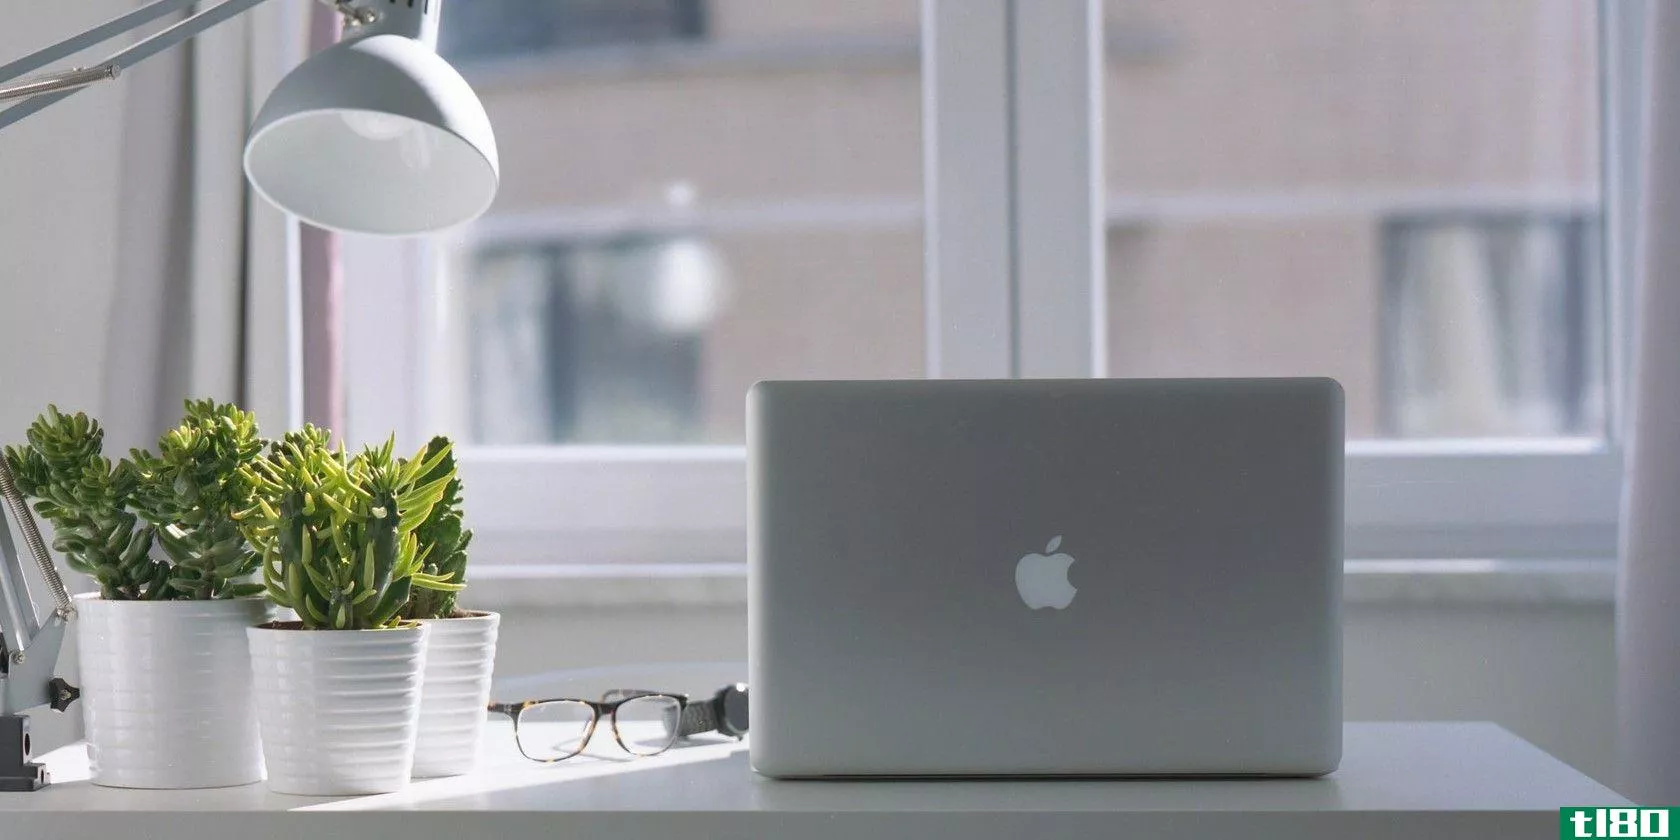 Macbook sitting on a desk with plants, eyeglasses, and a lamp